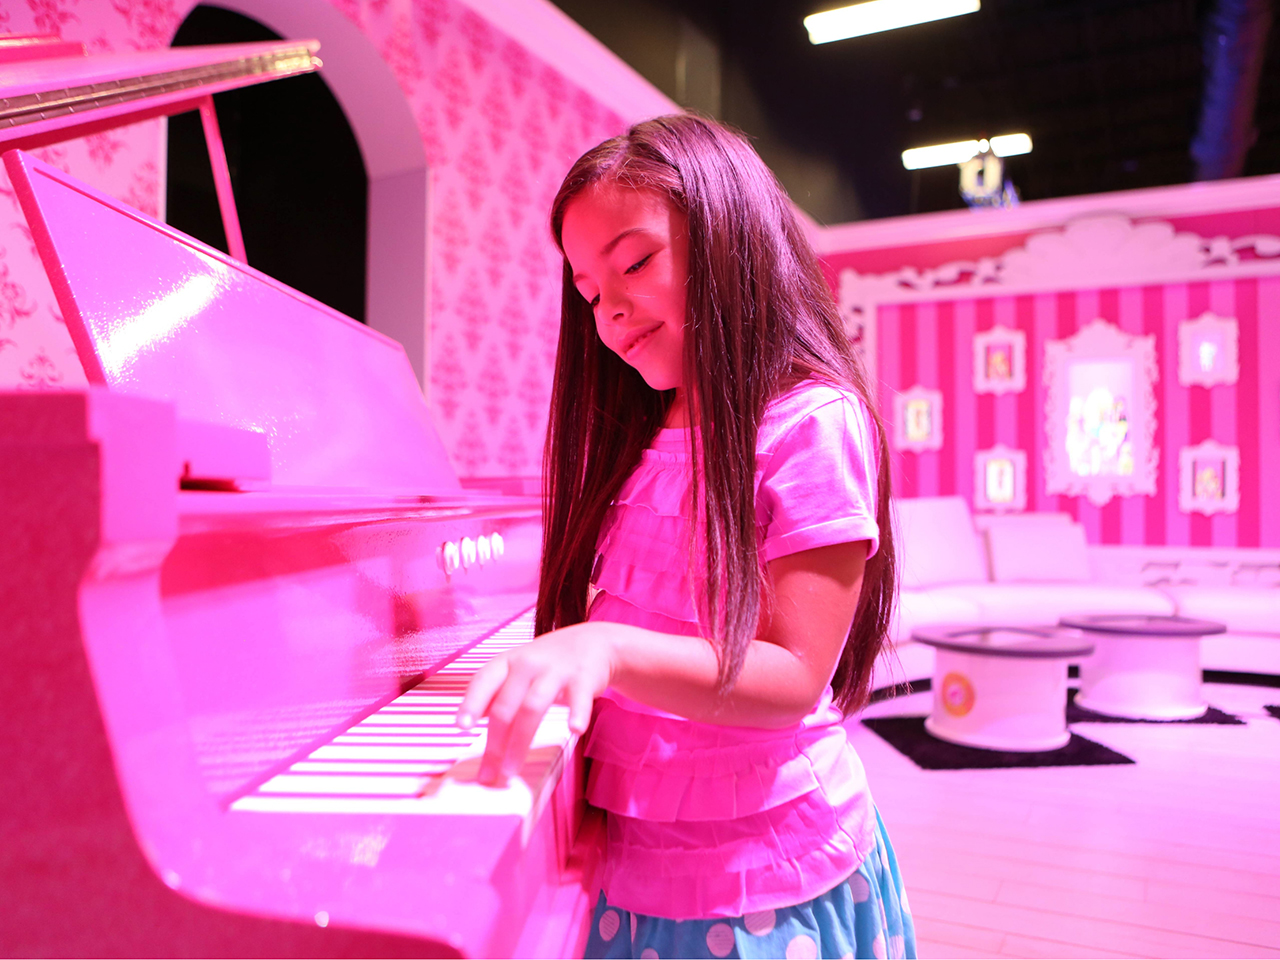 Barbie S Dreamhouse Now Life Size Reality In Florida,Moon Flowers Tattoo